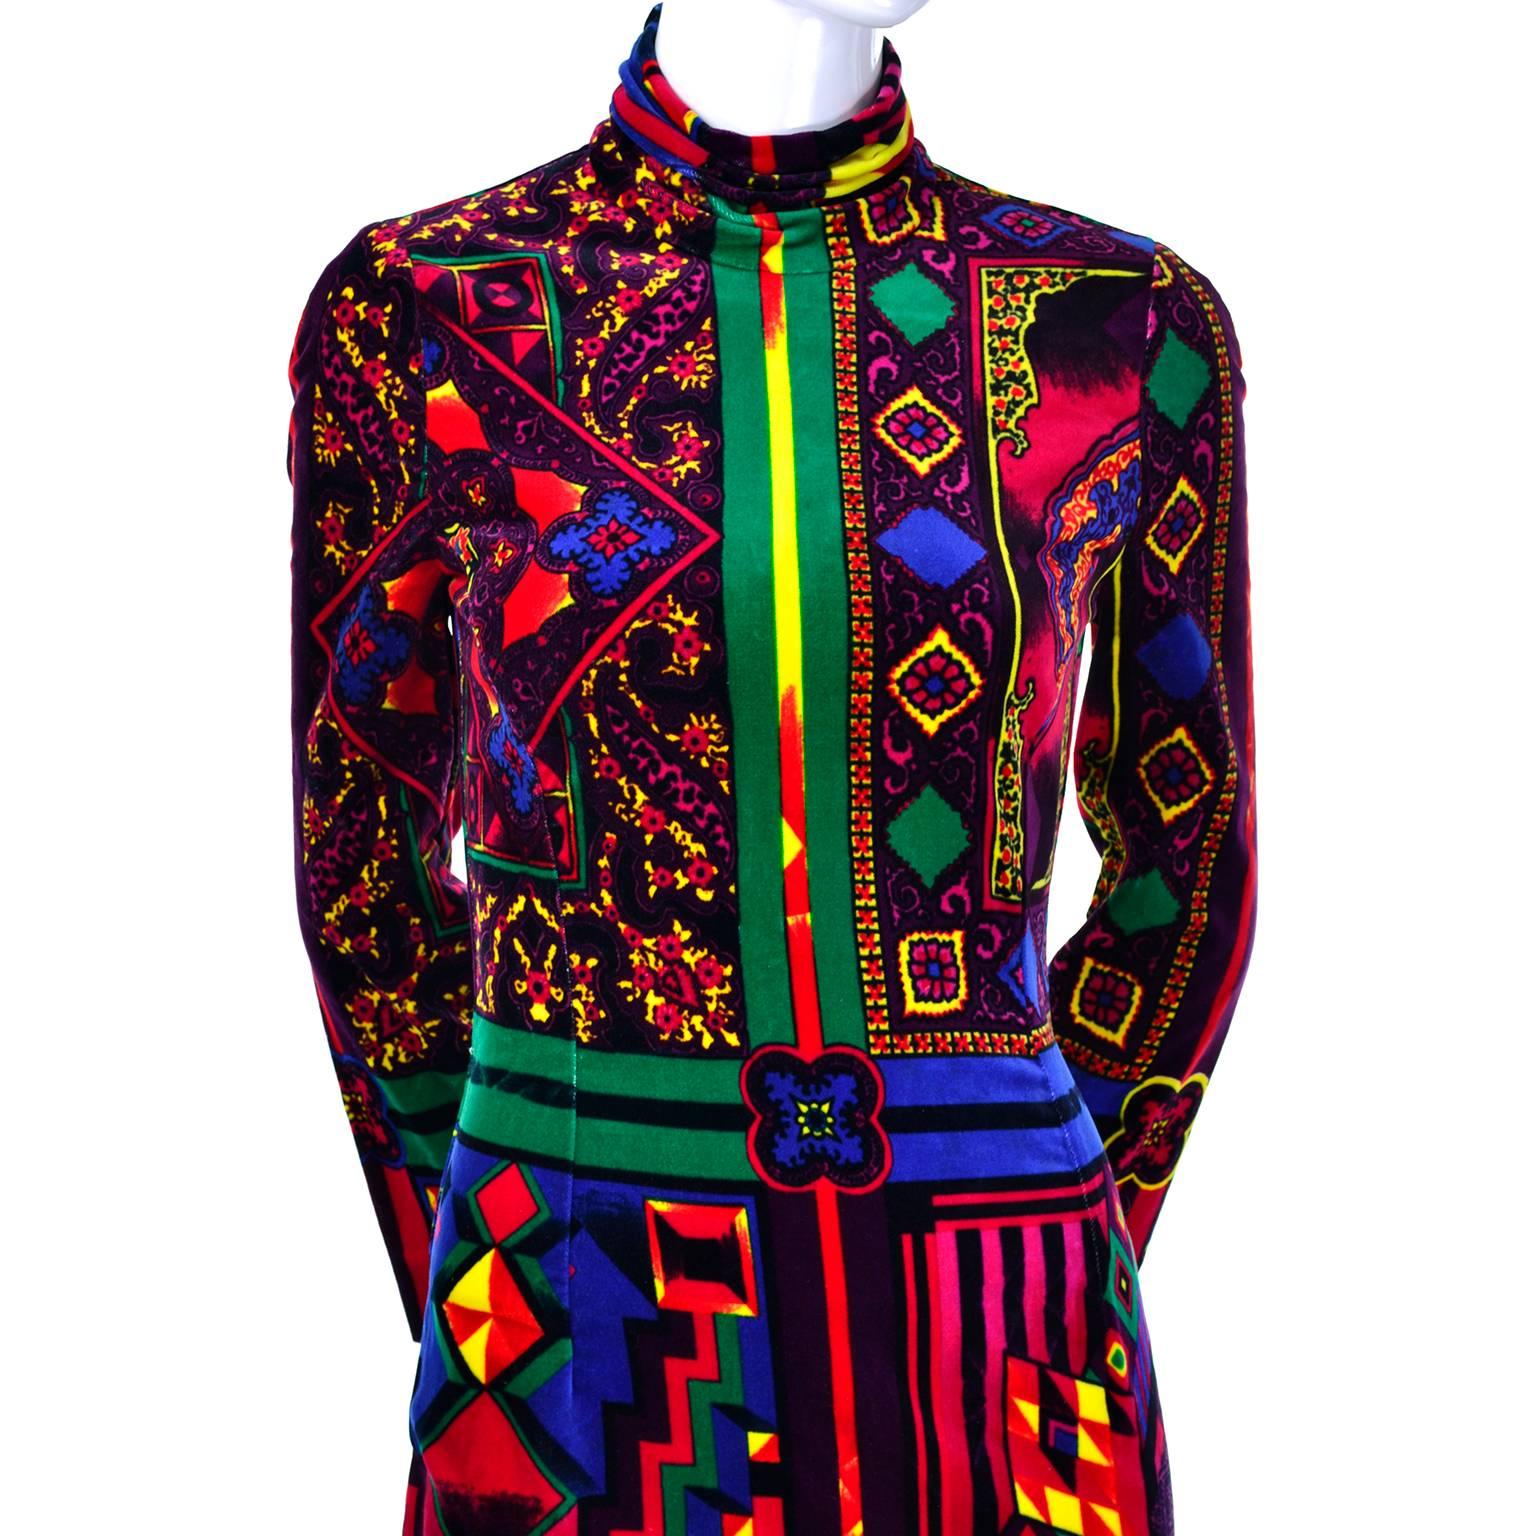 Black New 1990s Gianni Versace Vintage Dress in Bold Abstract Pattern Velvet w/ tag